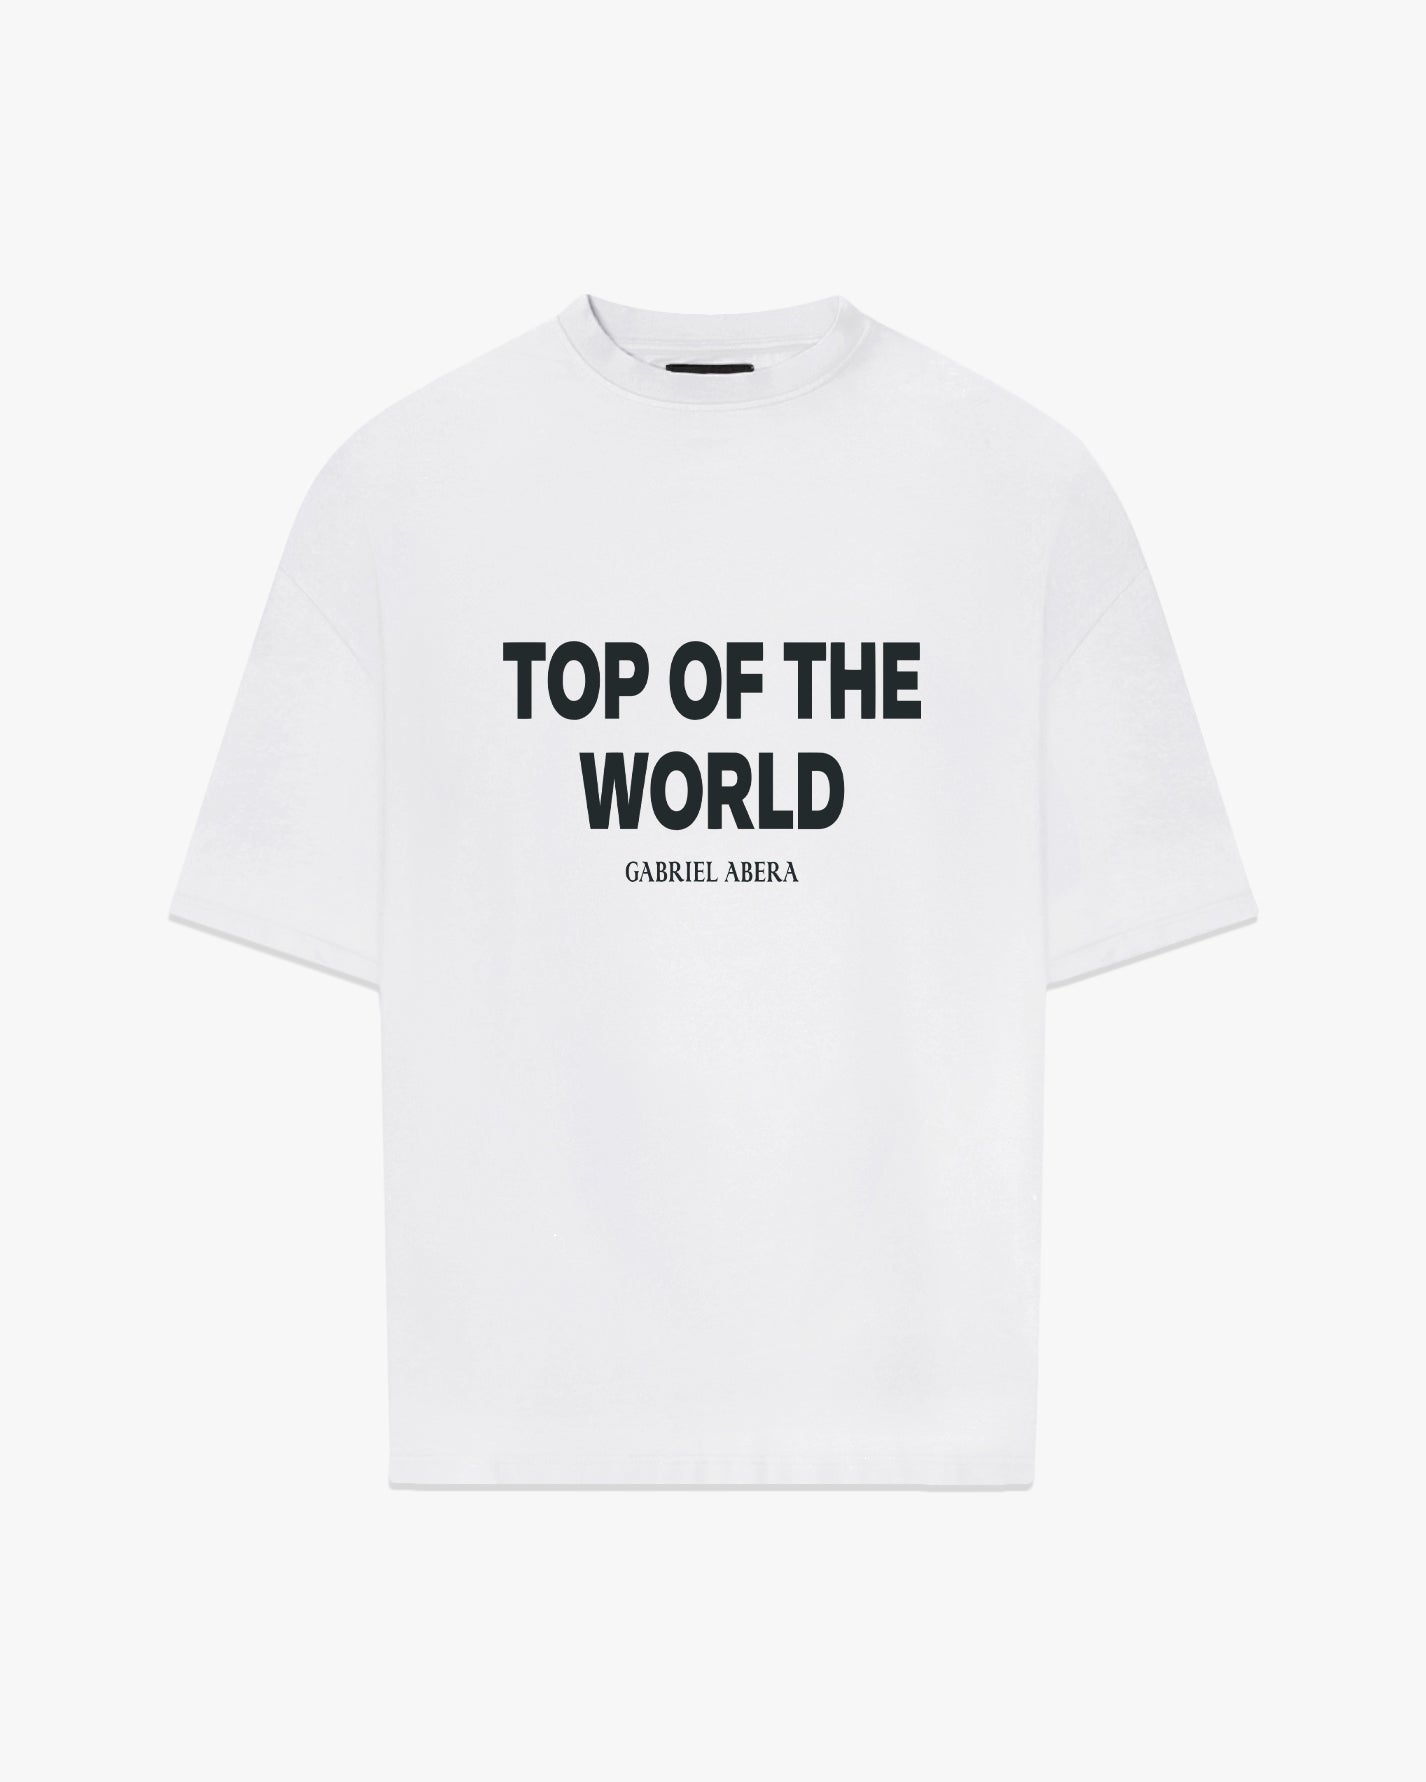 White oversize tshirt wiht black top of the world design in the front